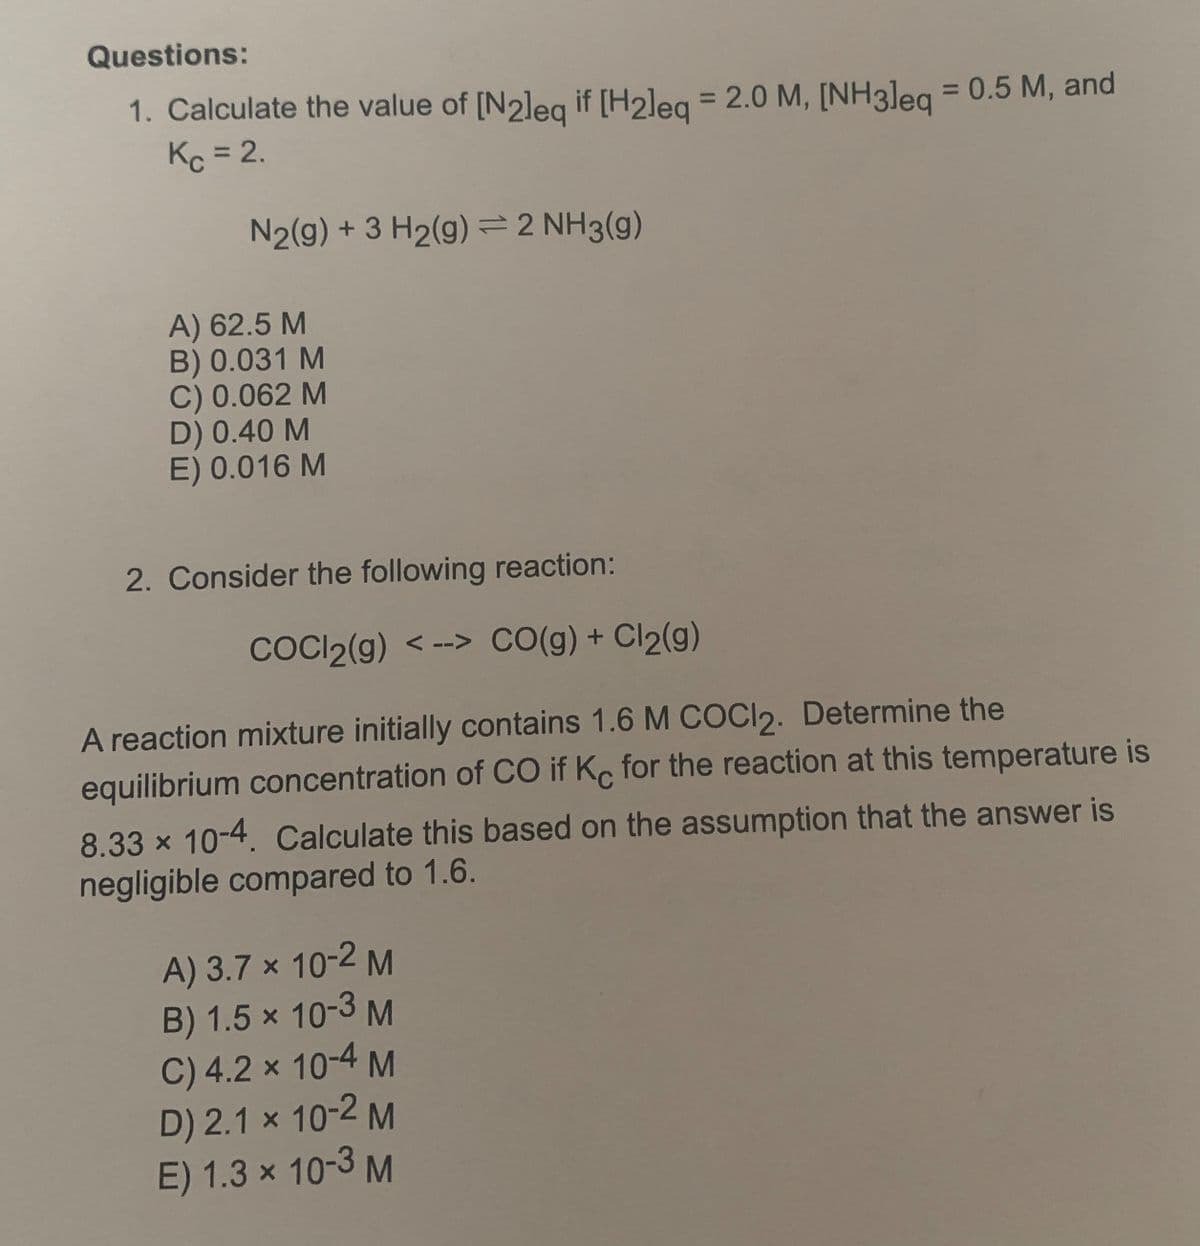 Questions:
1. Calculate the value of [N2leq if [H2leq = 2.0 M, [NH3leq = 0.5 M, and
Kc = 2.
N₂(g) + 3 H₂(g) = 2 NH3(g)
A) 62.5 M
B) 0.031 M
C) 0.062 M
D) 0.40 M
E) 0.016 M
2. Consider the following reaction:
COCl2(g) <--> CO(g) + Cl₂(g)
A reaction mixture initially contains 1.6 M COCI2. Determine the
equilibrium concentration of CO if Kc for the reaction at this temperature is
8.33 × 10-4. Calculate this based on the assumption that the answer is
negligible compared to 1.6.
A) 3.7 x 10-2 M
B) 1.5 x 10-3 M
C) 4.2 × 10-4 M
D) 2.1 x 10-2 M
E) 1.3 × 10-3 M